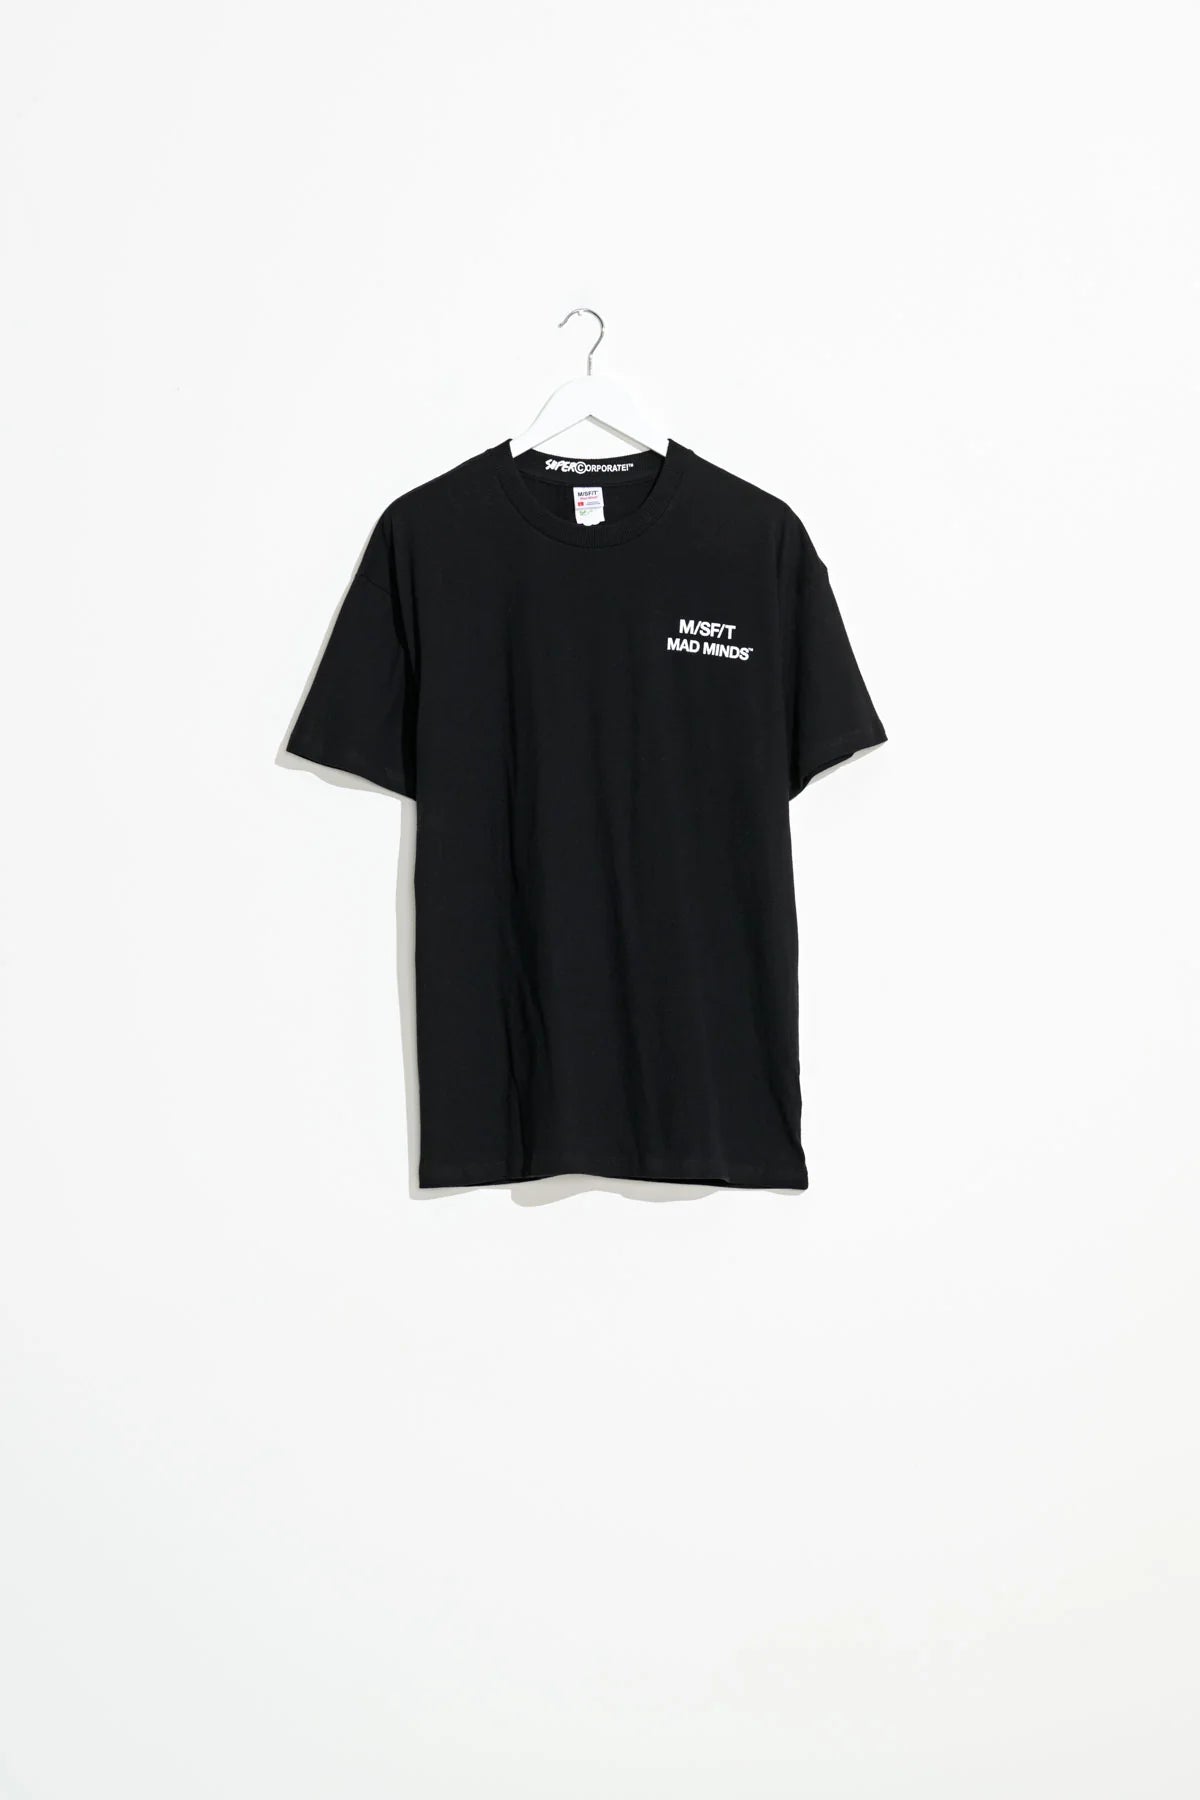 MISFIT // Supercorporate 3.0 SS Tee WASHED BLACK